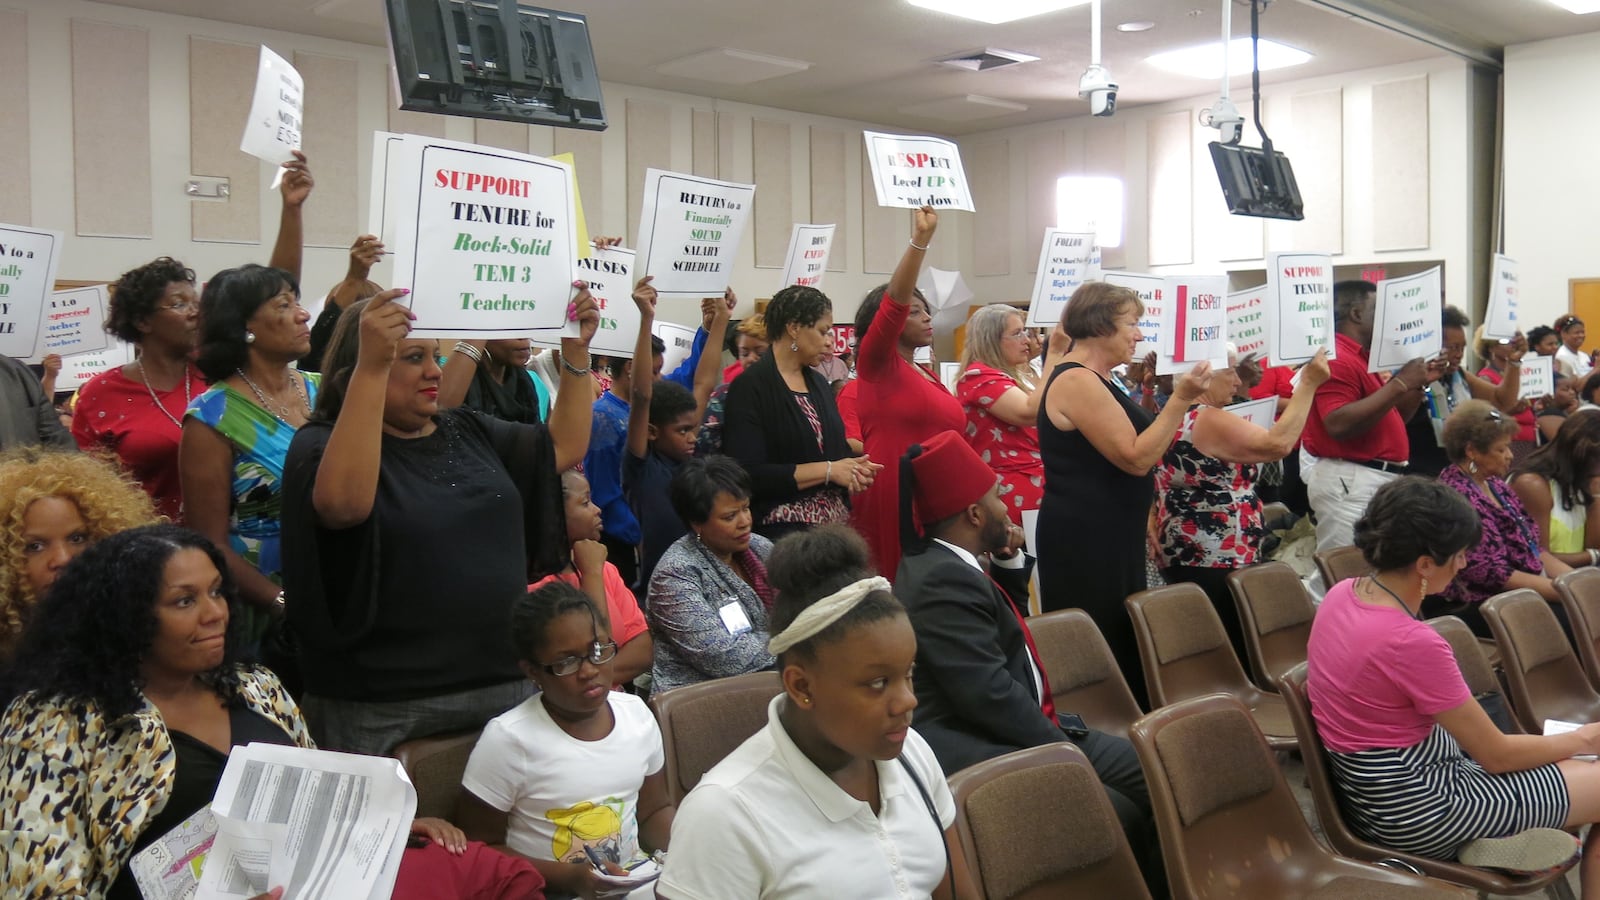 Several Shelby County School teachers attended the board meeting Tuesday  evening to protest pay, displaced tenured teachers and the revised teacher evaluation model.  (August 26, 2014)